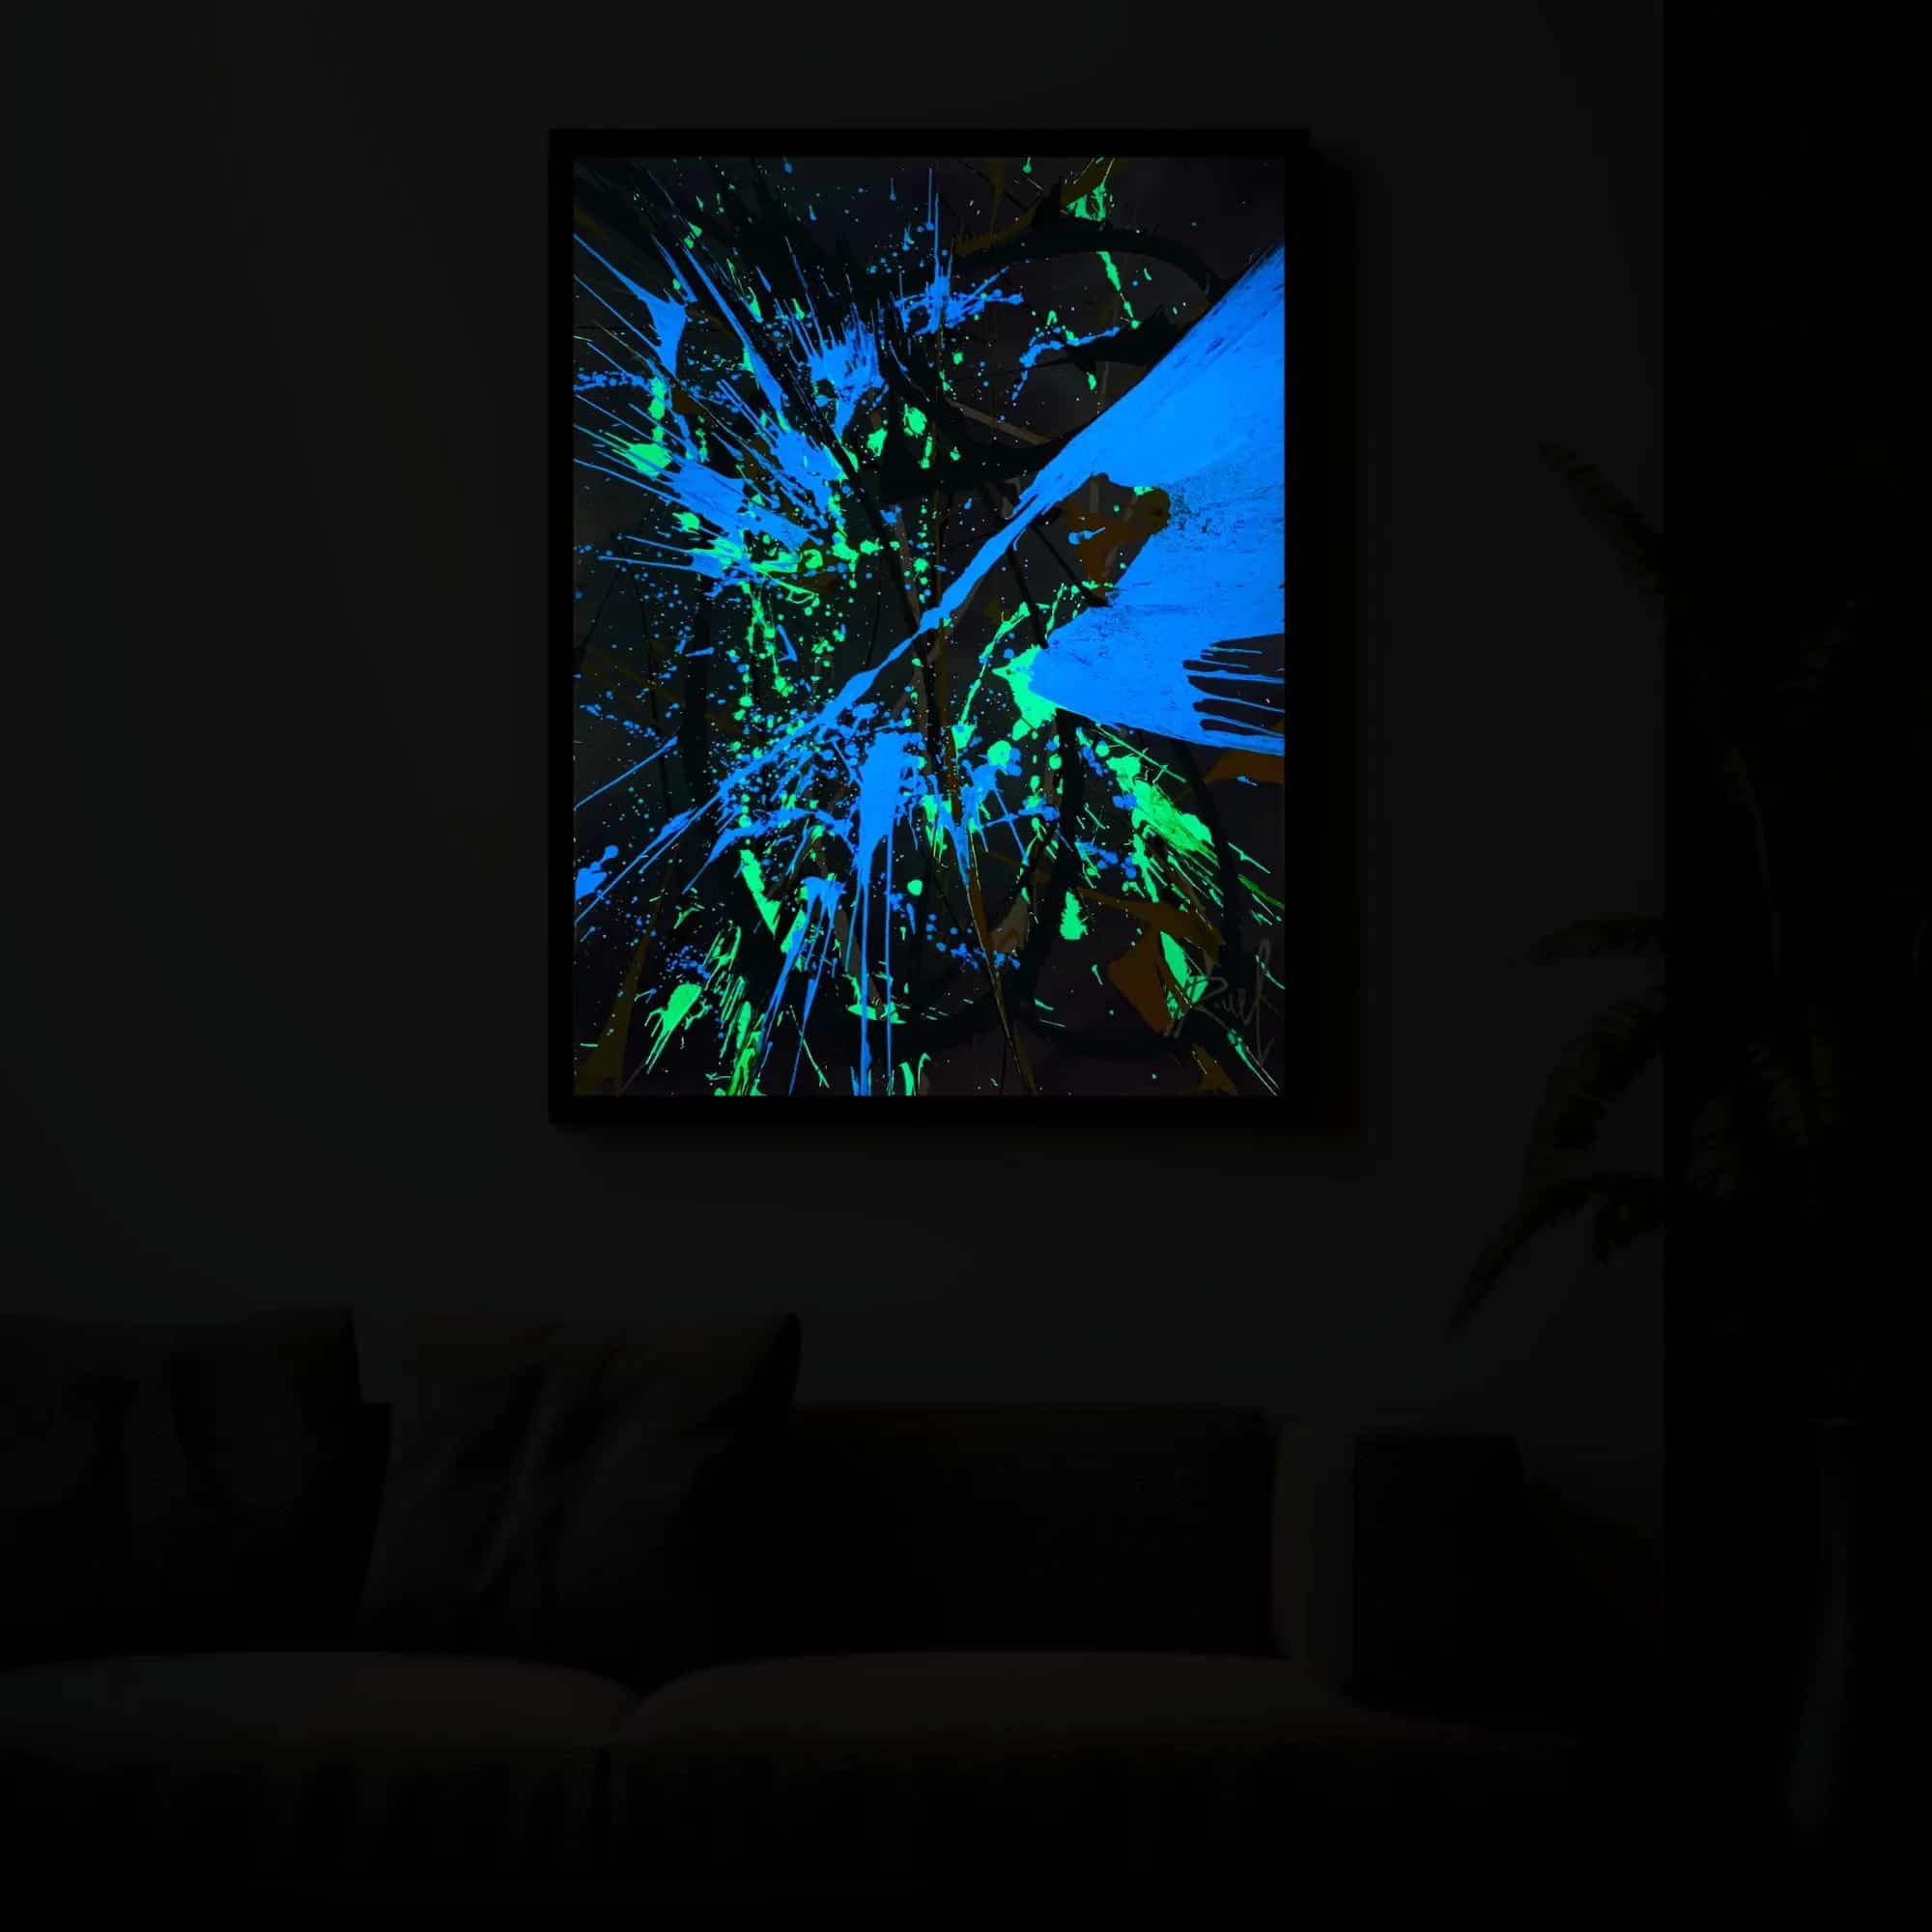 Night's canvas painting glow, a spin art paint symphony in glow in the dark tones, casting acrylic allure in living space.